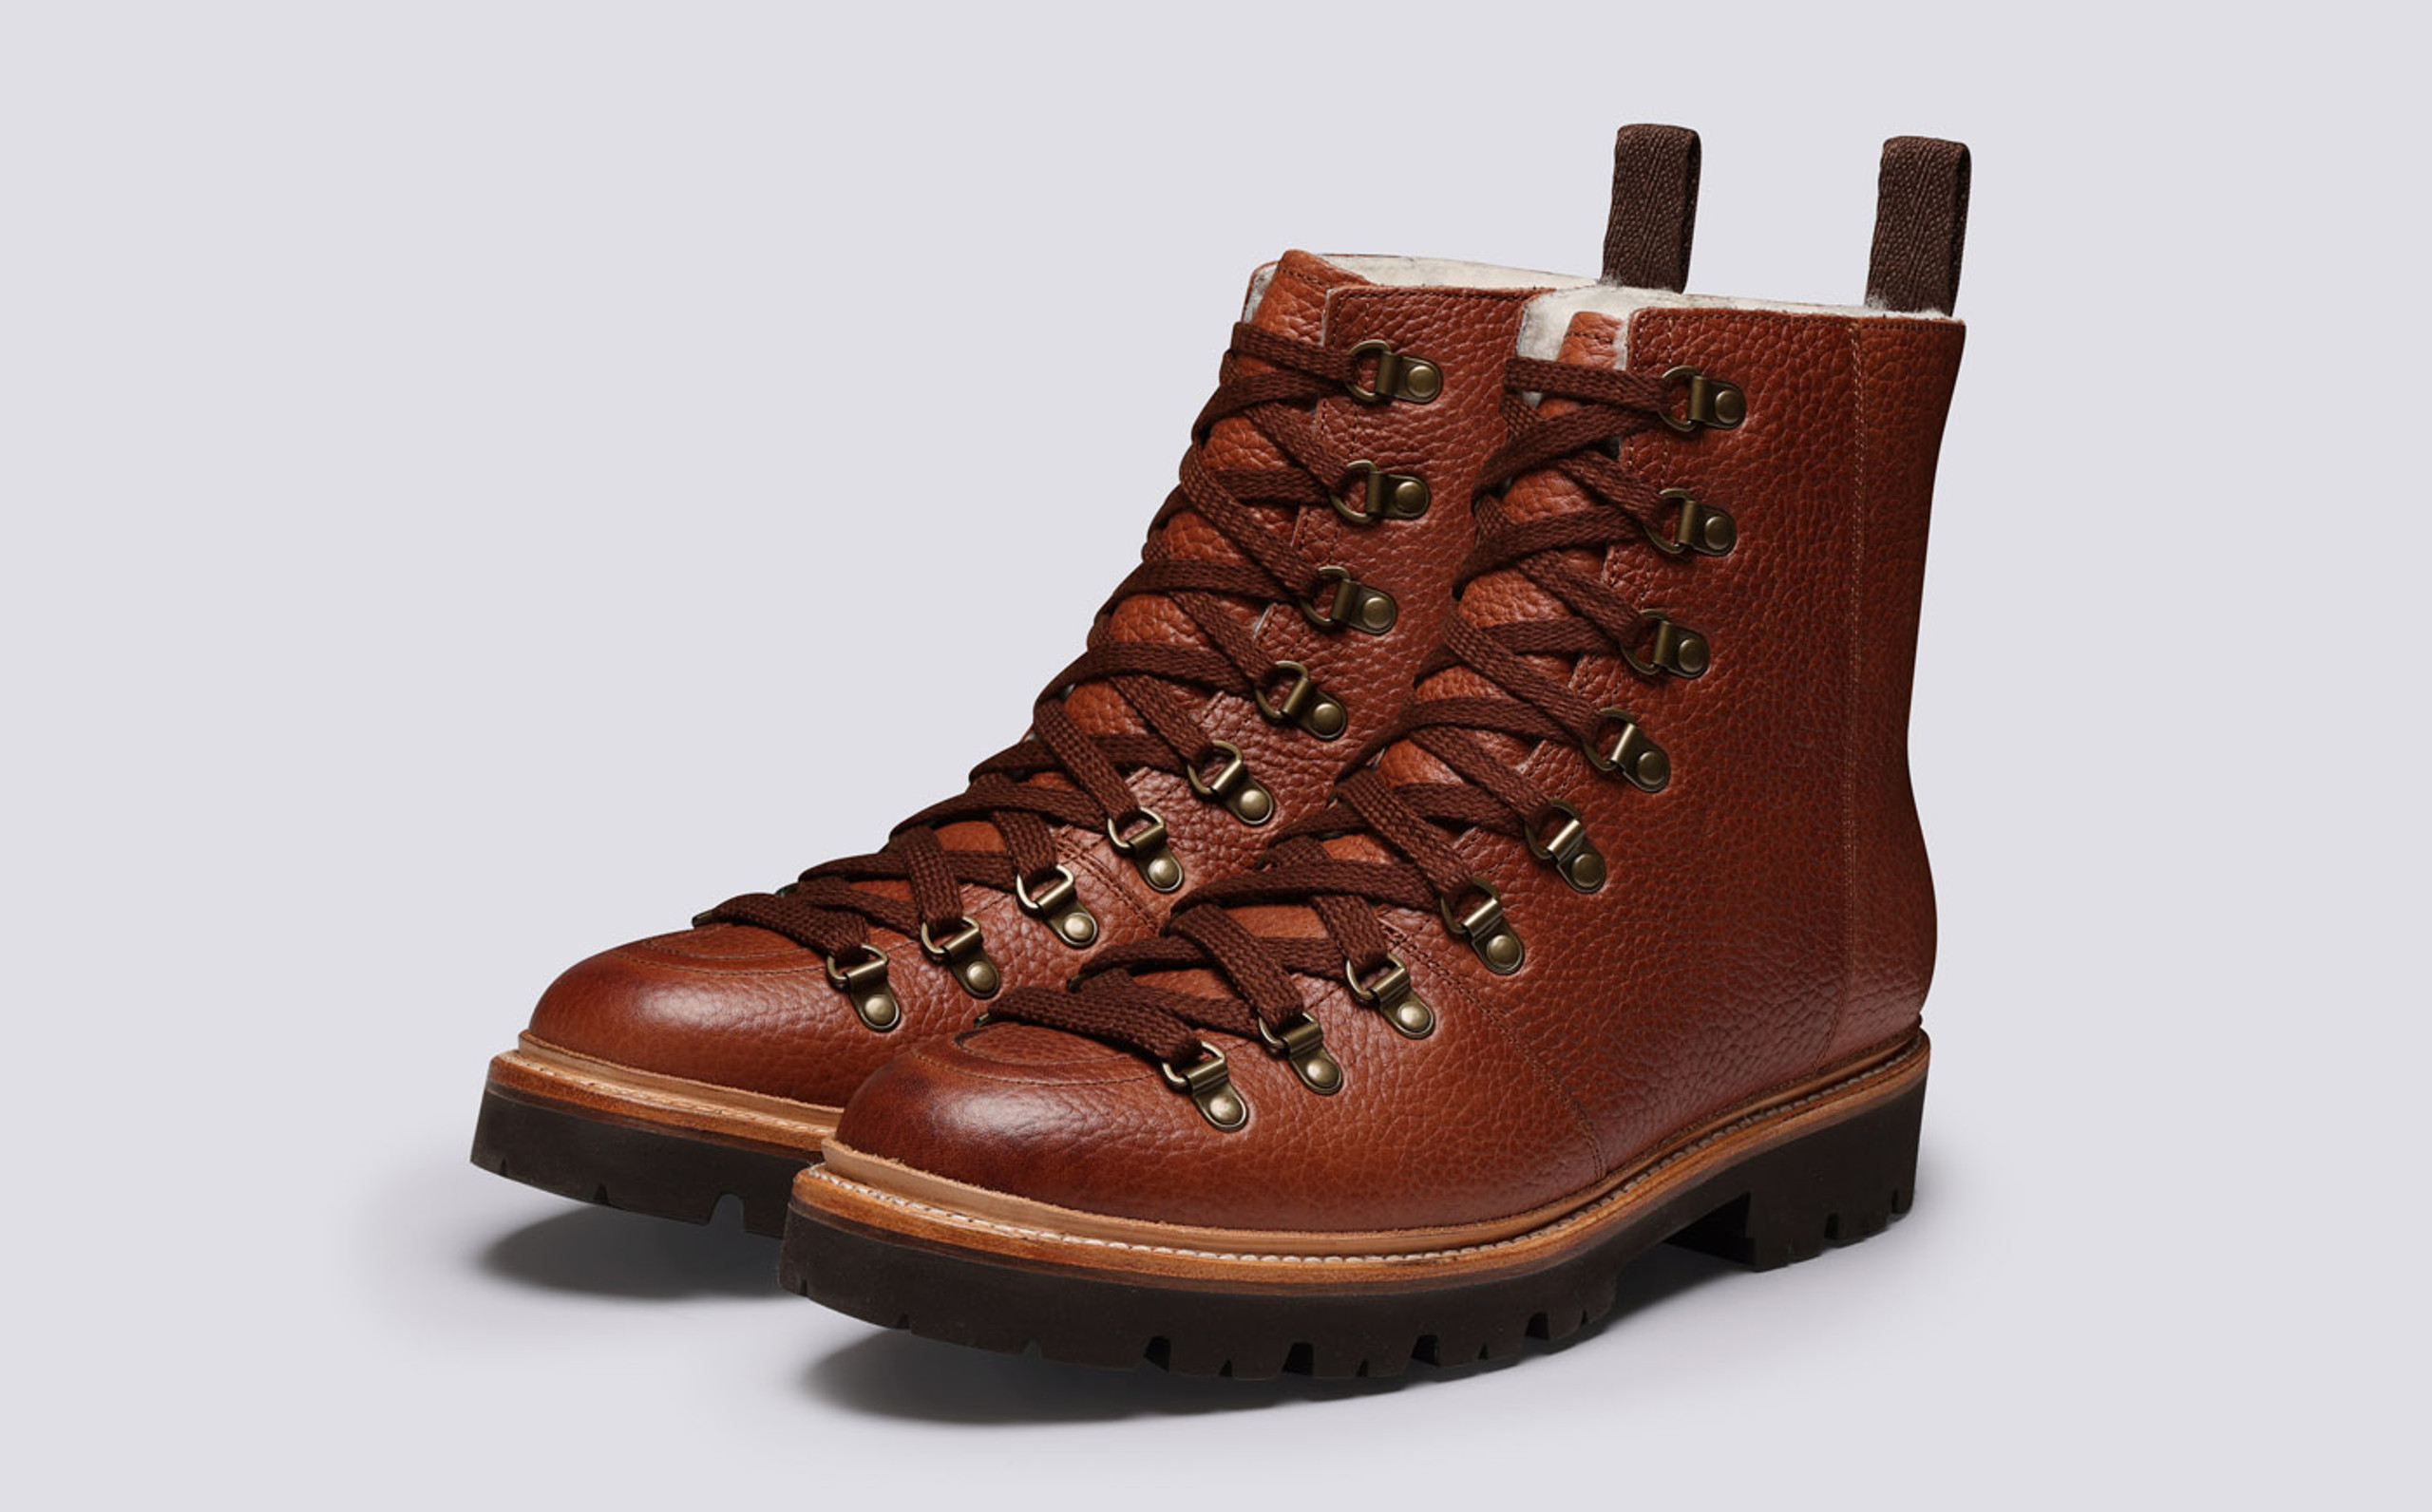 Brady | Mens Hiker Boots in Tan Leather on Commando Sole | Grenson Shoes